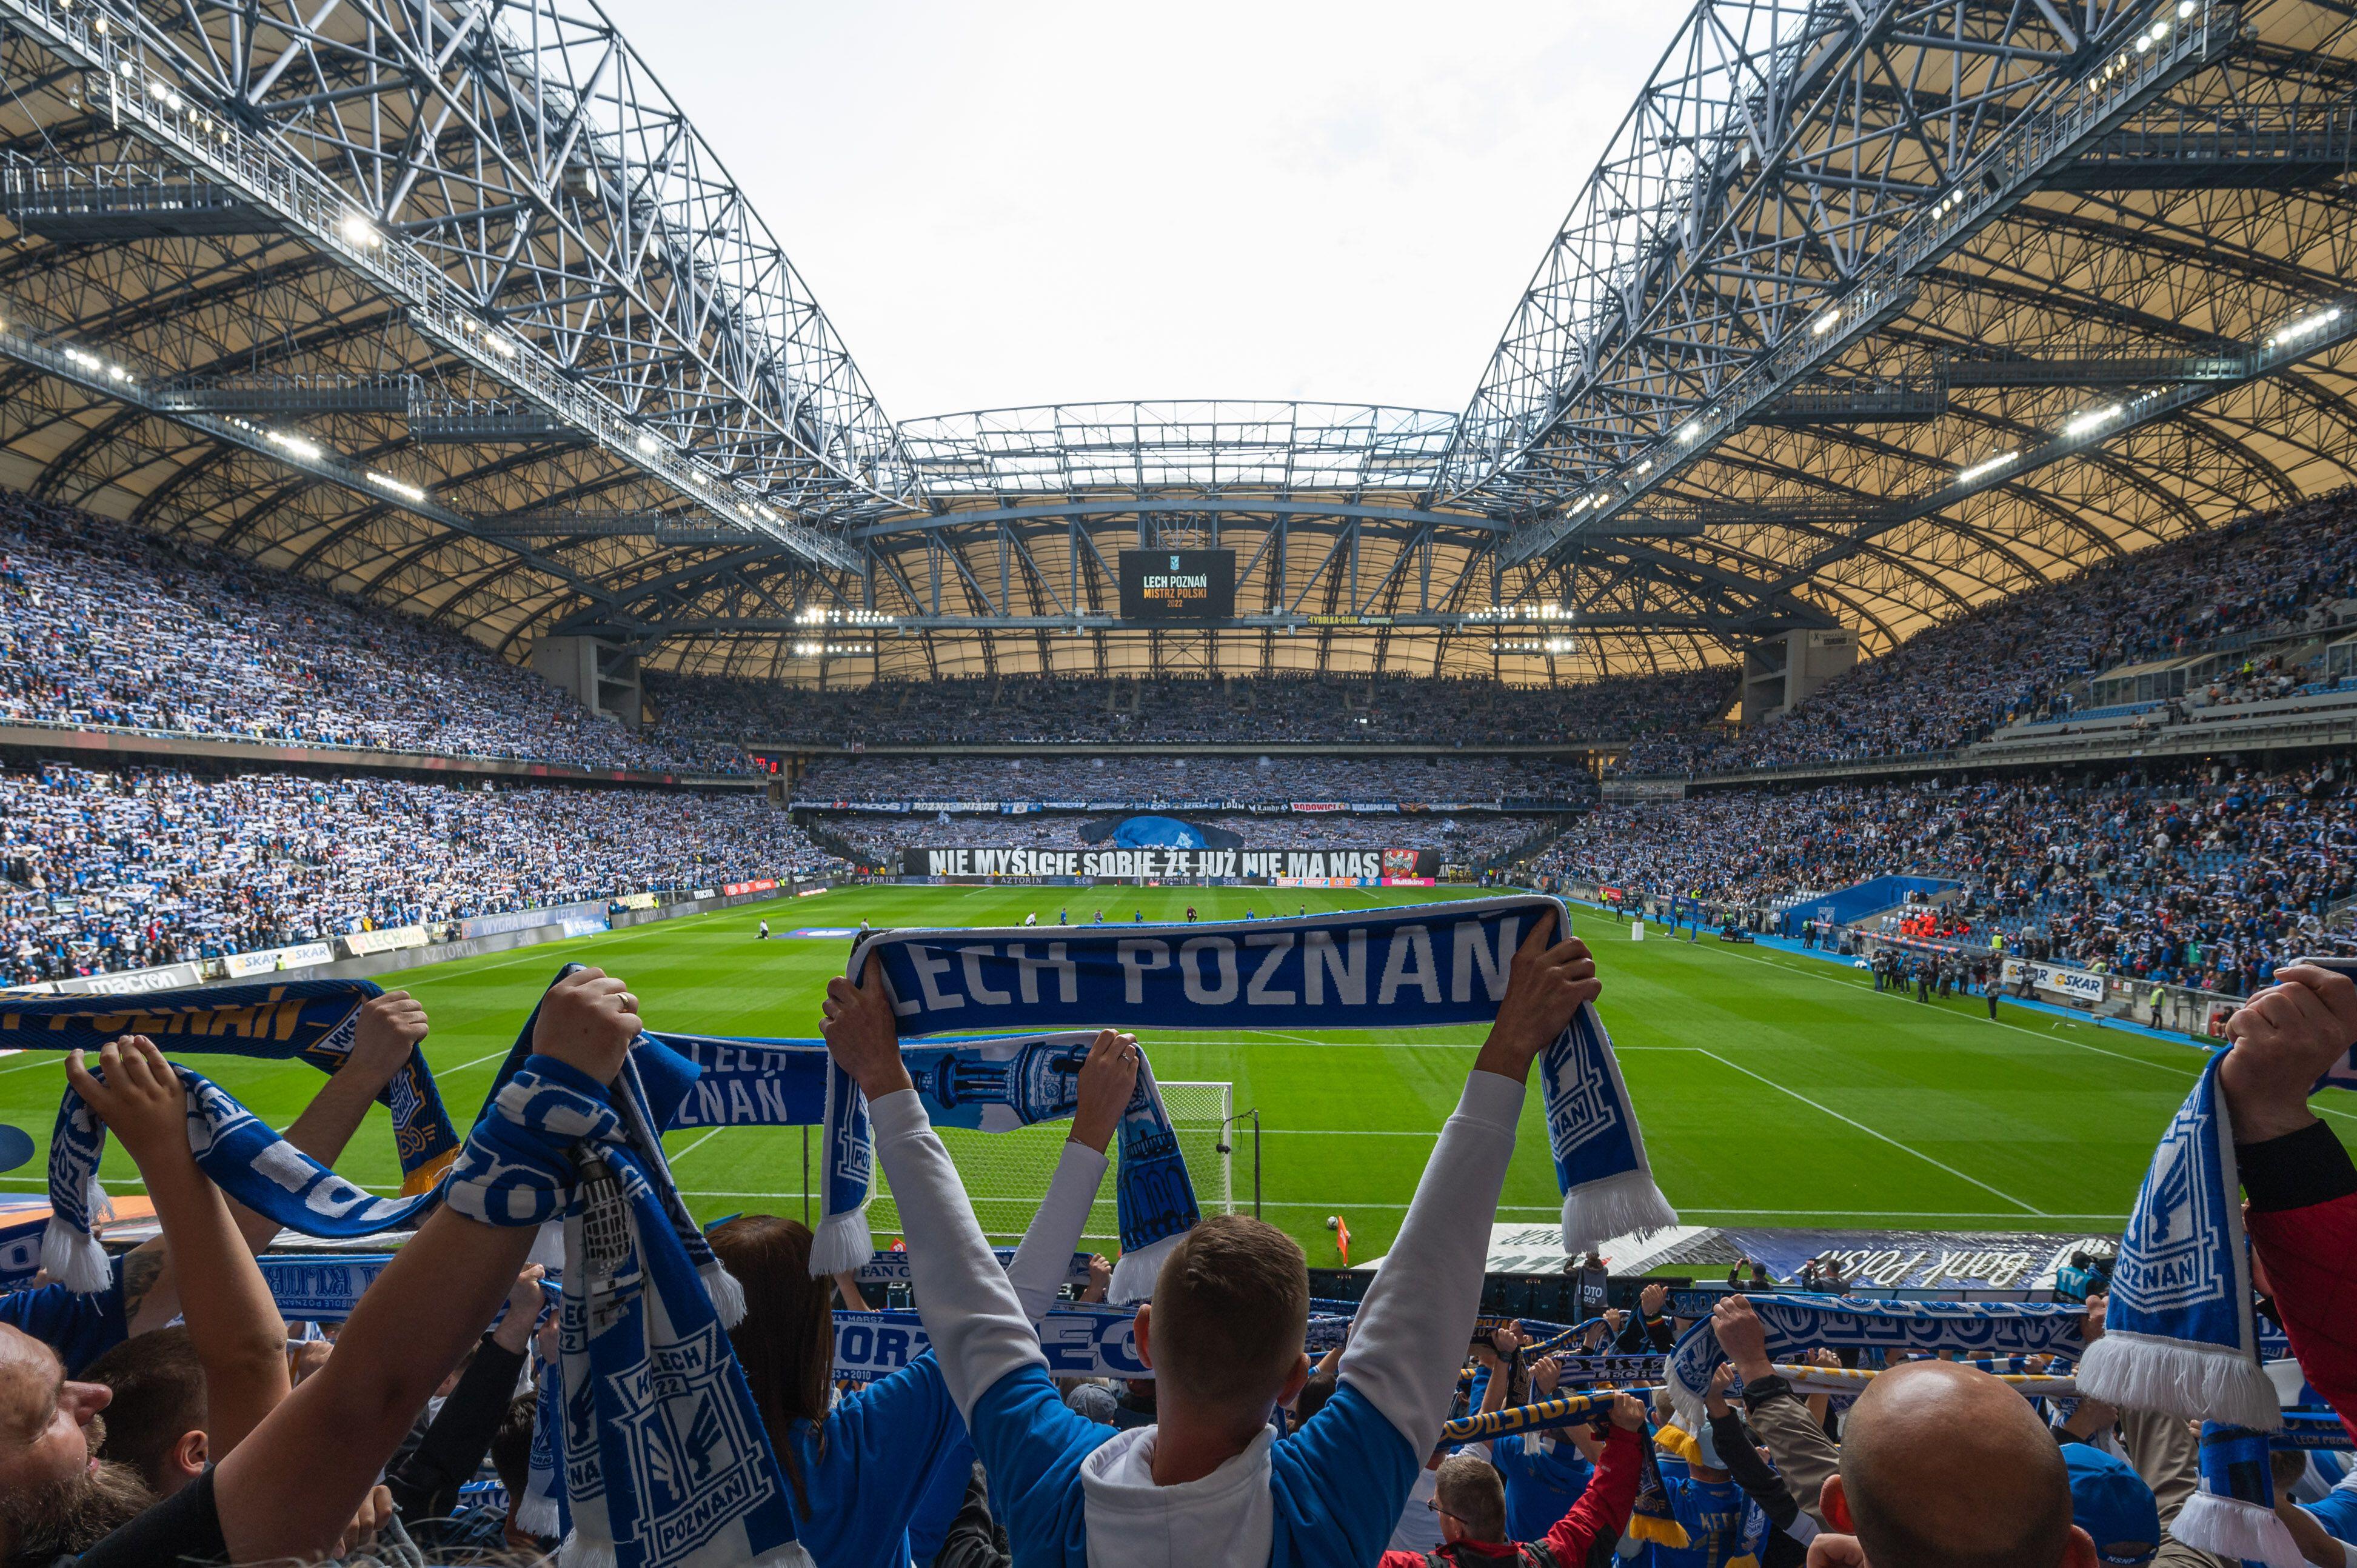 Lech Poznań vs tips: Europa Conference League preview, predictions, team news and odds 101 Great Goals